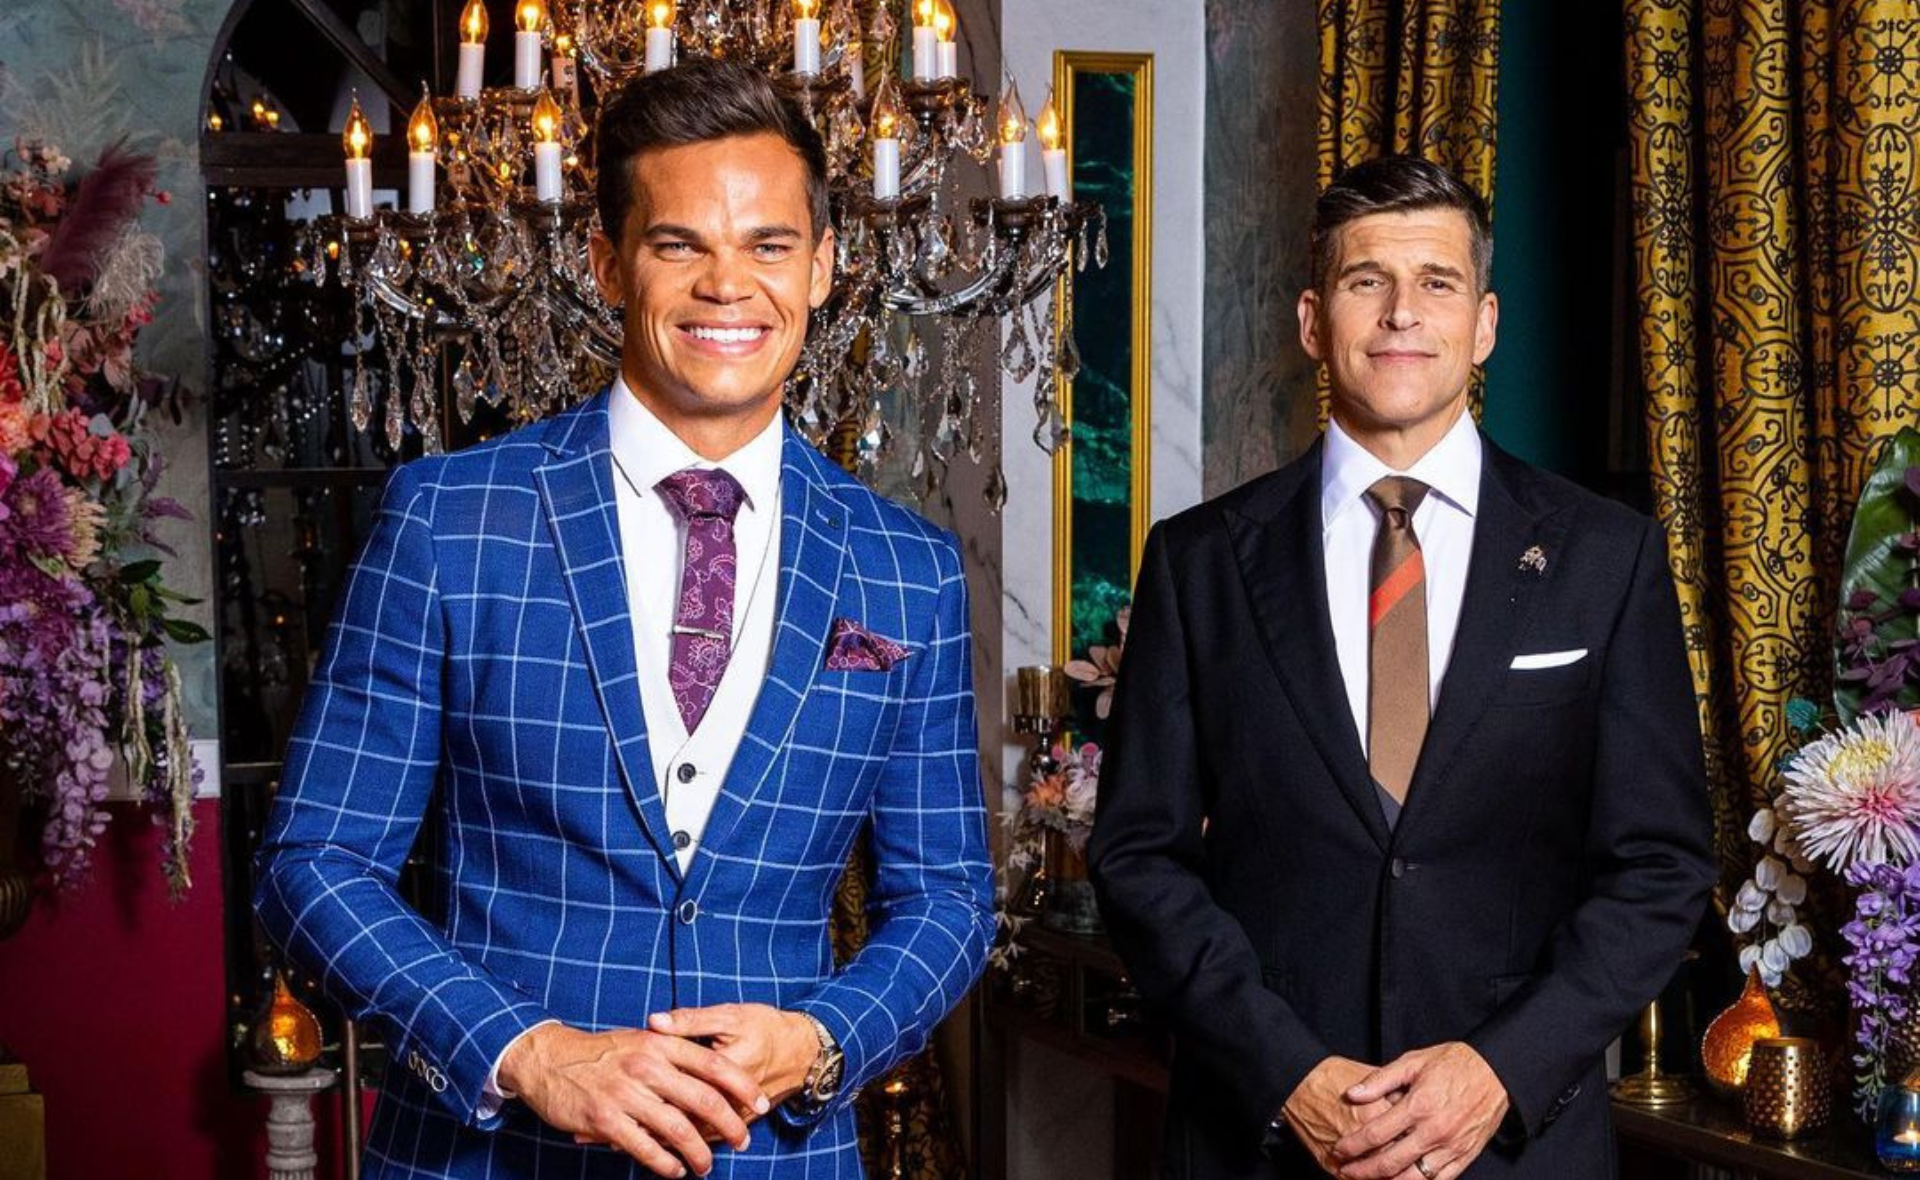 Bachelor Jimmy Nicholson reveals the intimate (and secret) details behind the rose ceremony